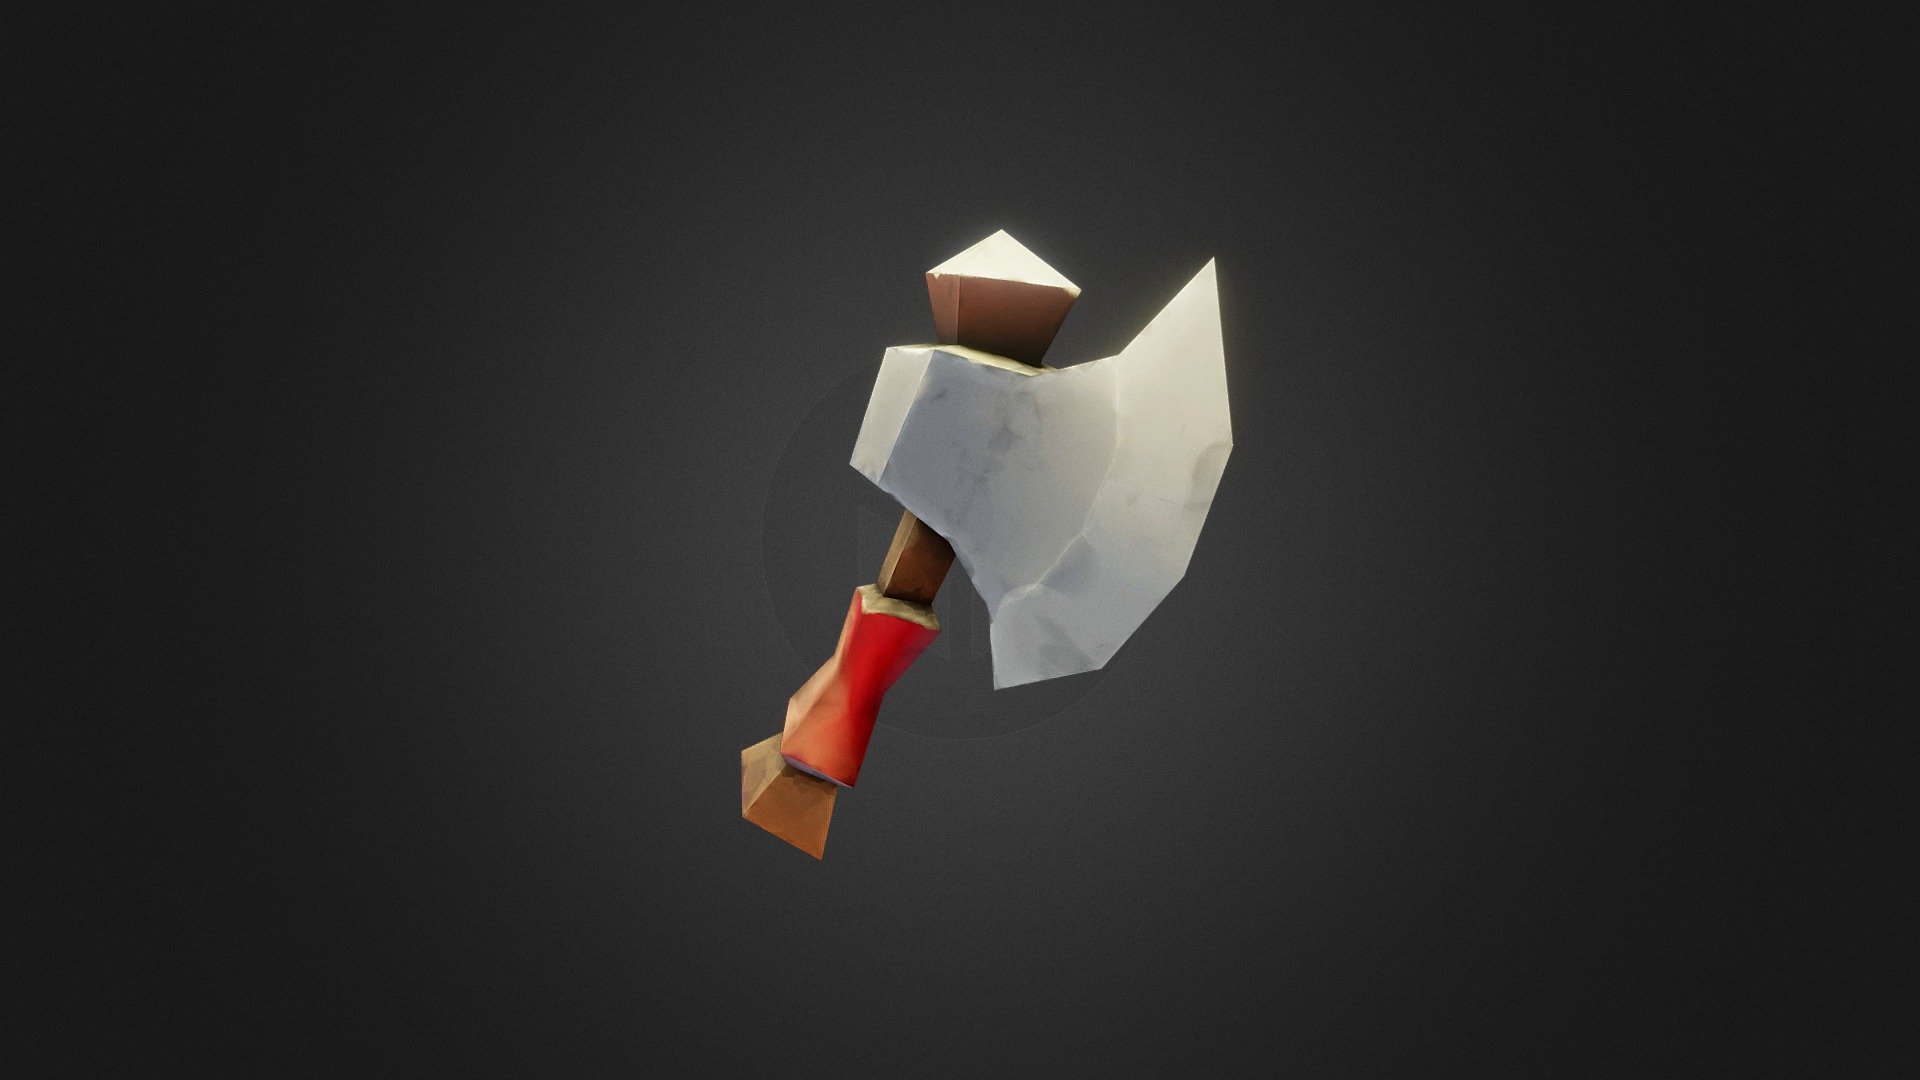 Low-poly Stylized Axe for Game. Make i Blender and Substance painter. You can use it to make your own game 3d model